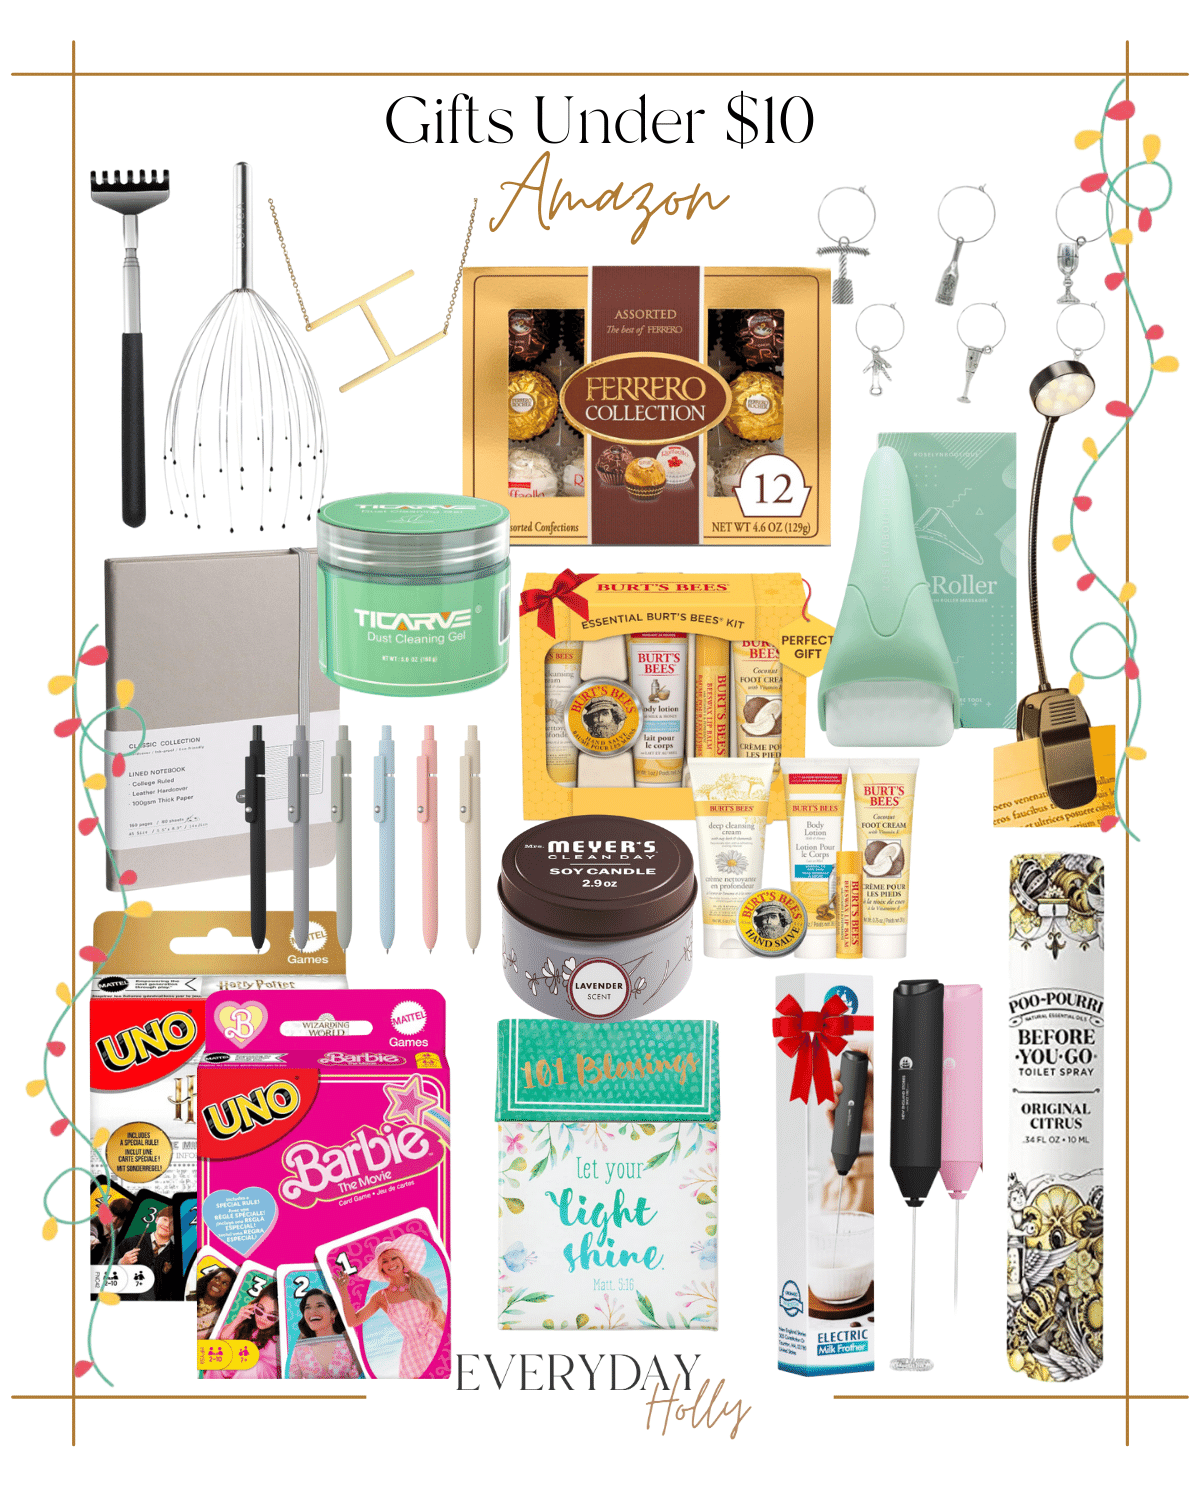 99 last minute gifts under $99 | #last #minute #gifts #giftideas #giftsunder99 #under99 #under10 #stockingstuffer #massage #iceroller #chocolate #booklight #pens #journal #burtsbees #candle #uno #barbie